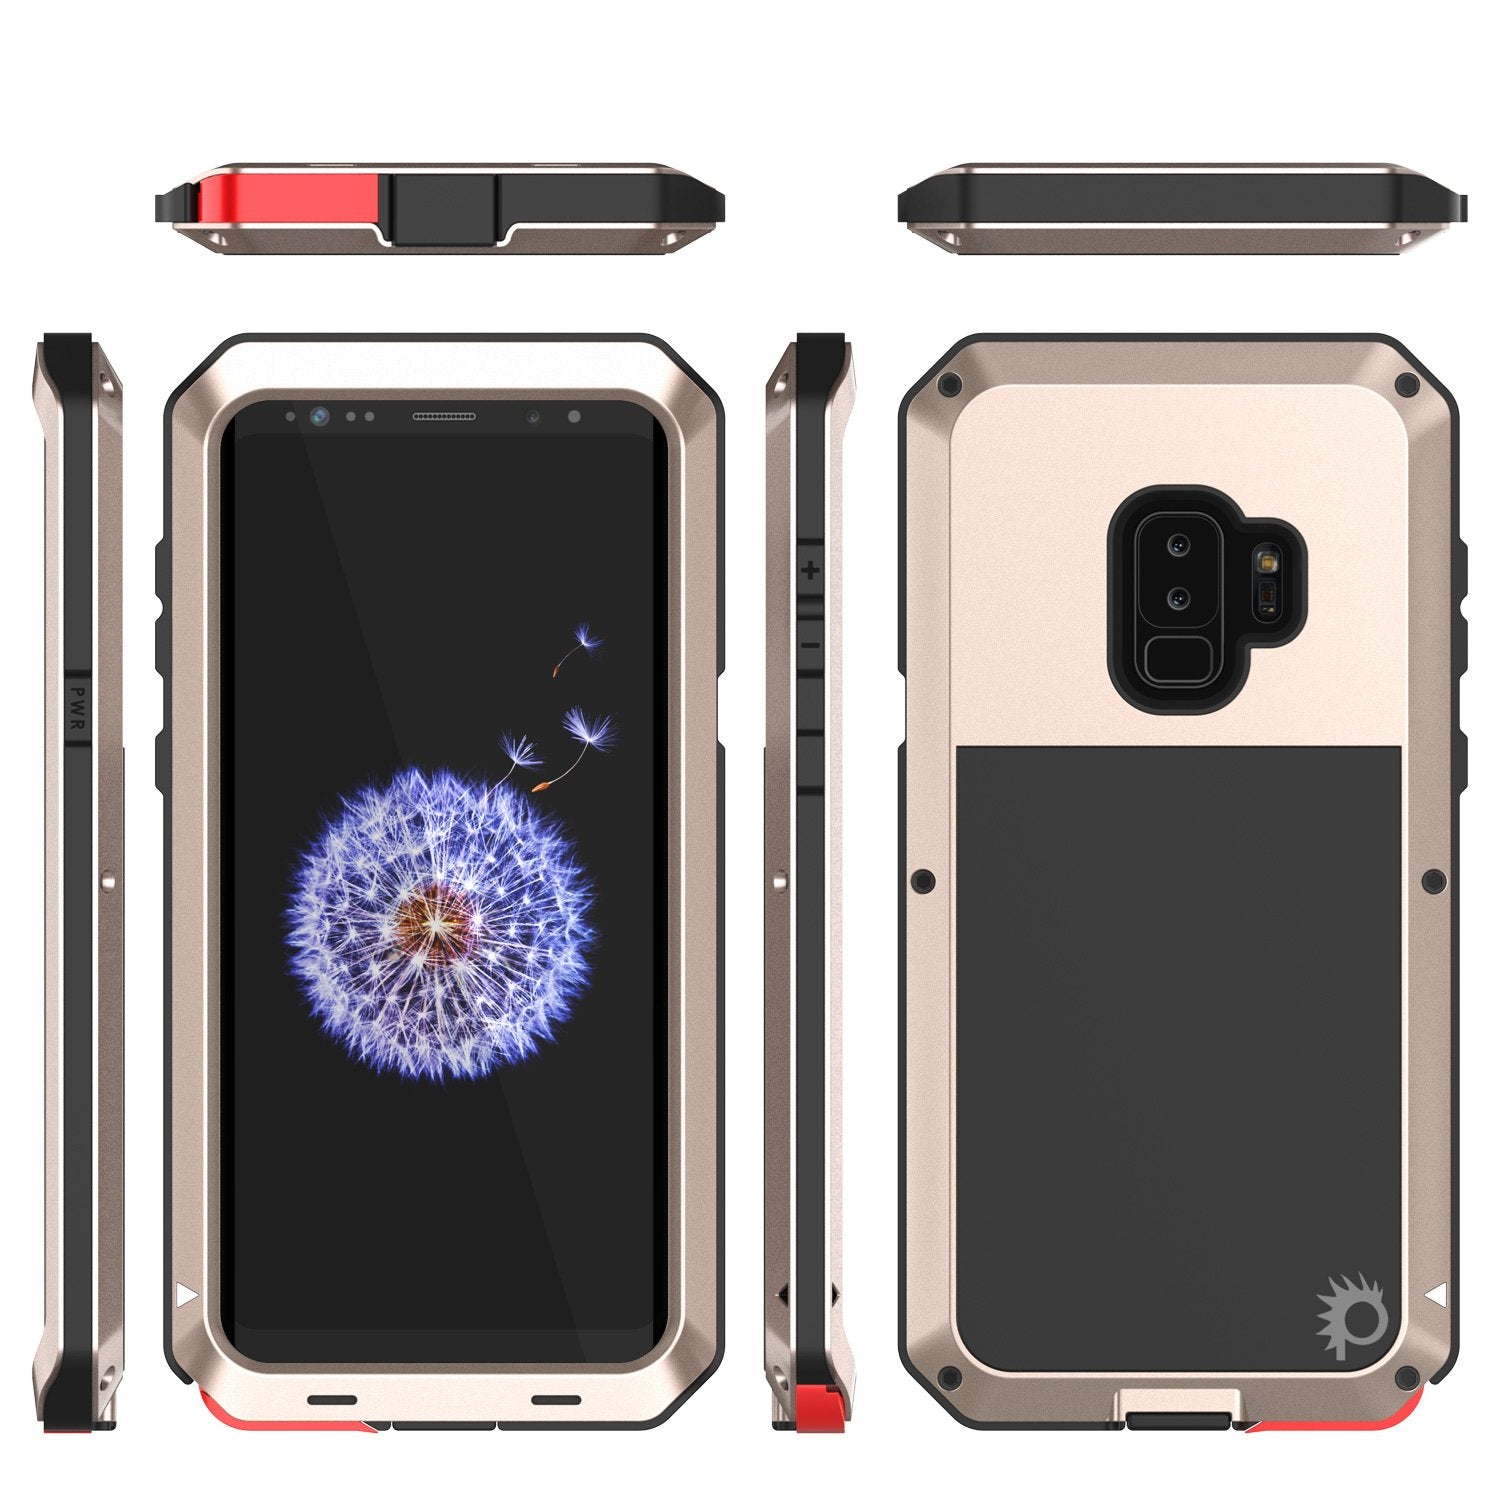 Galaxy S9 Plus Hybrid Shock Drop Proof Metal Case Armor Cover [Gold]